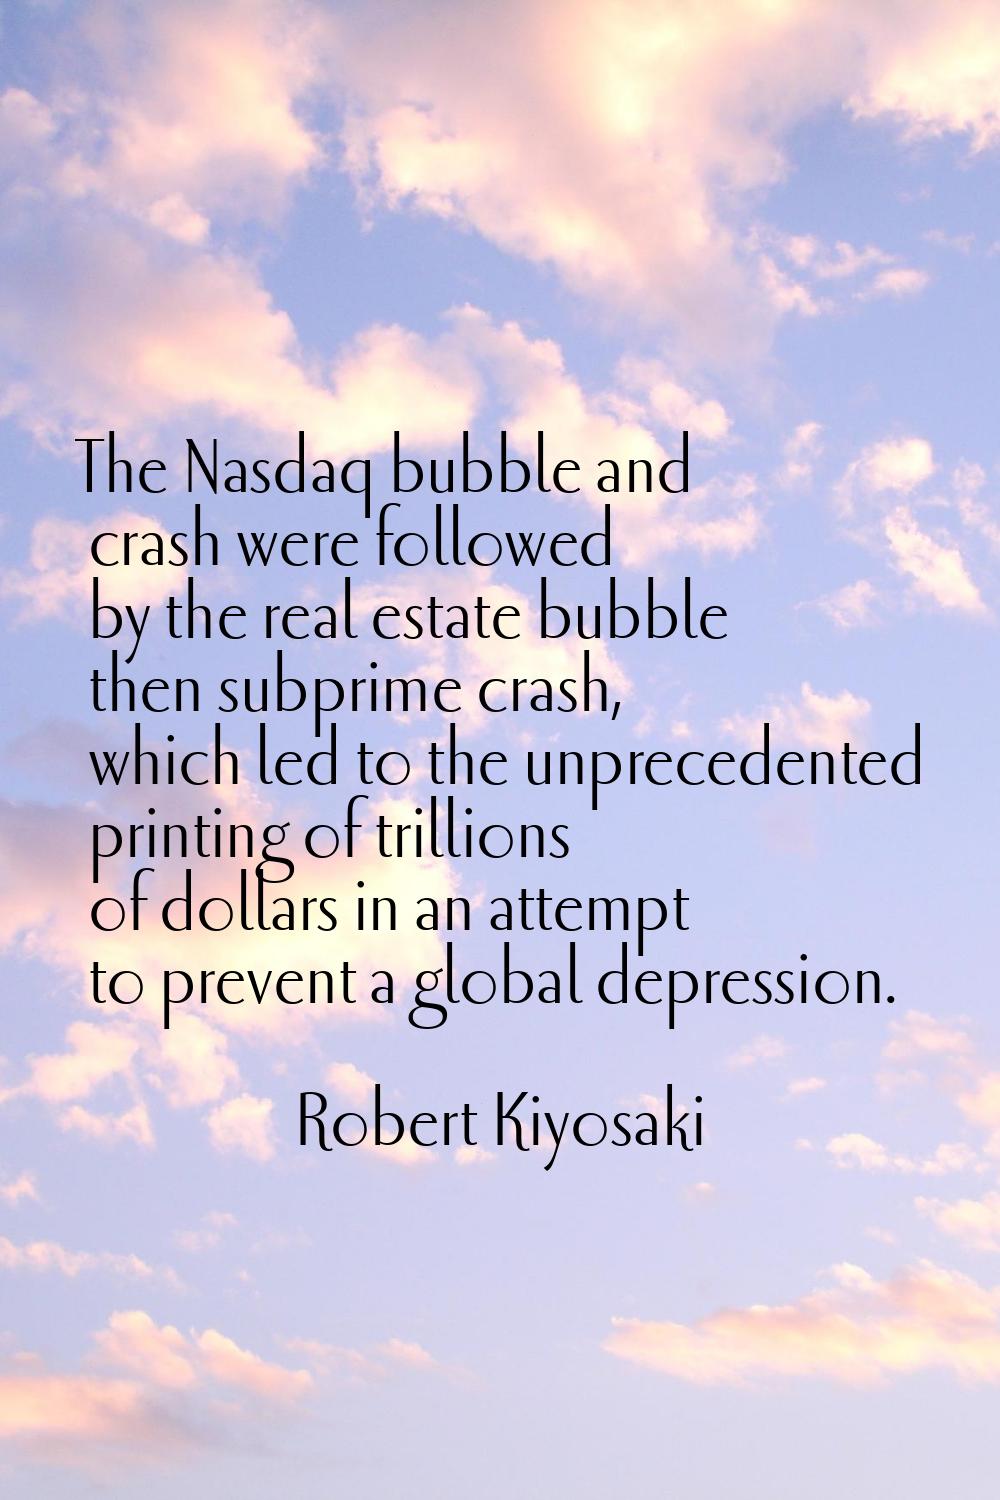 The Nasdaq bubble and crash were followed by the real estate bubble then subprime crash, which led 